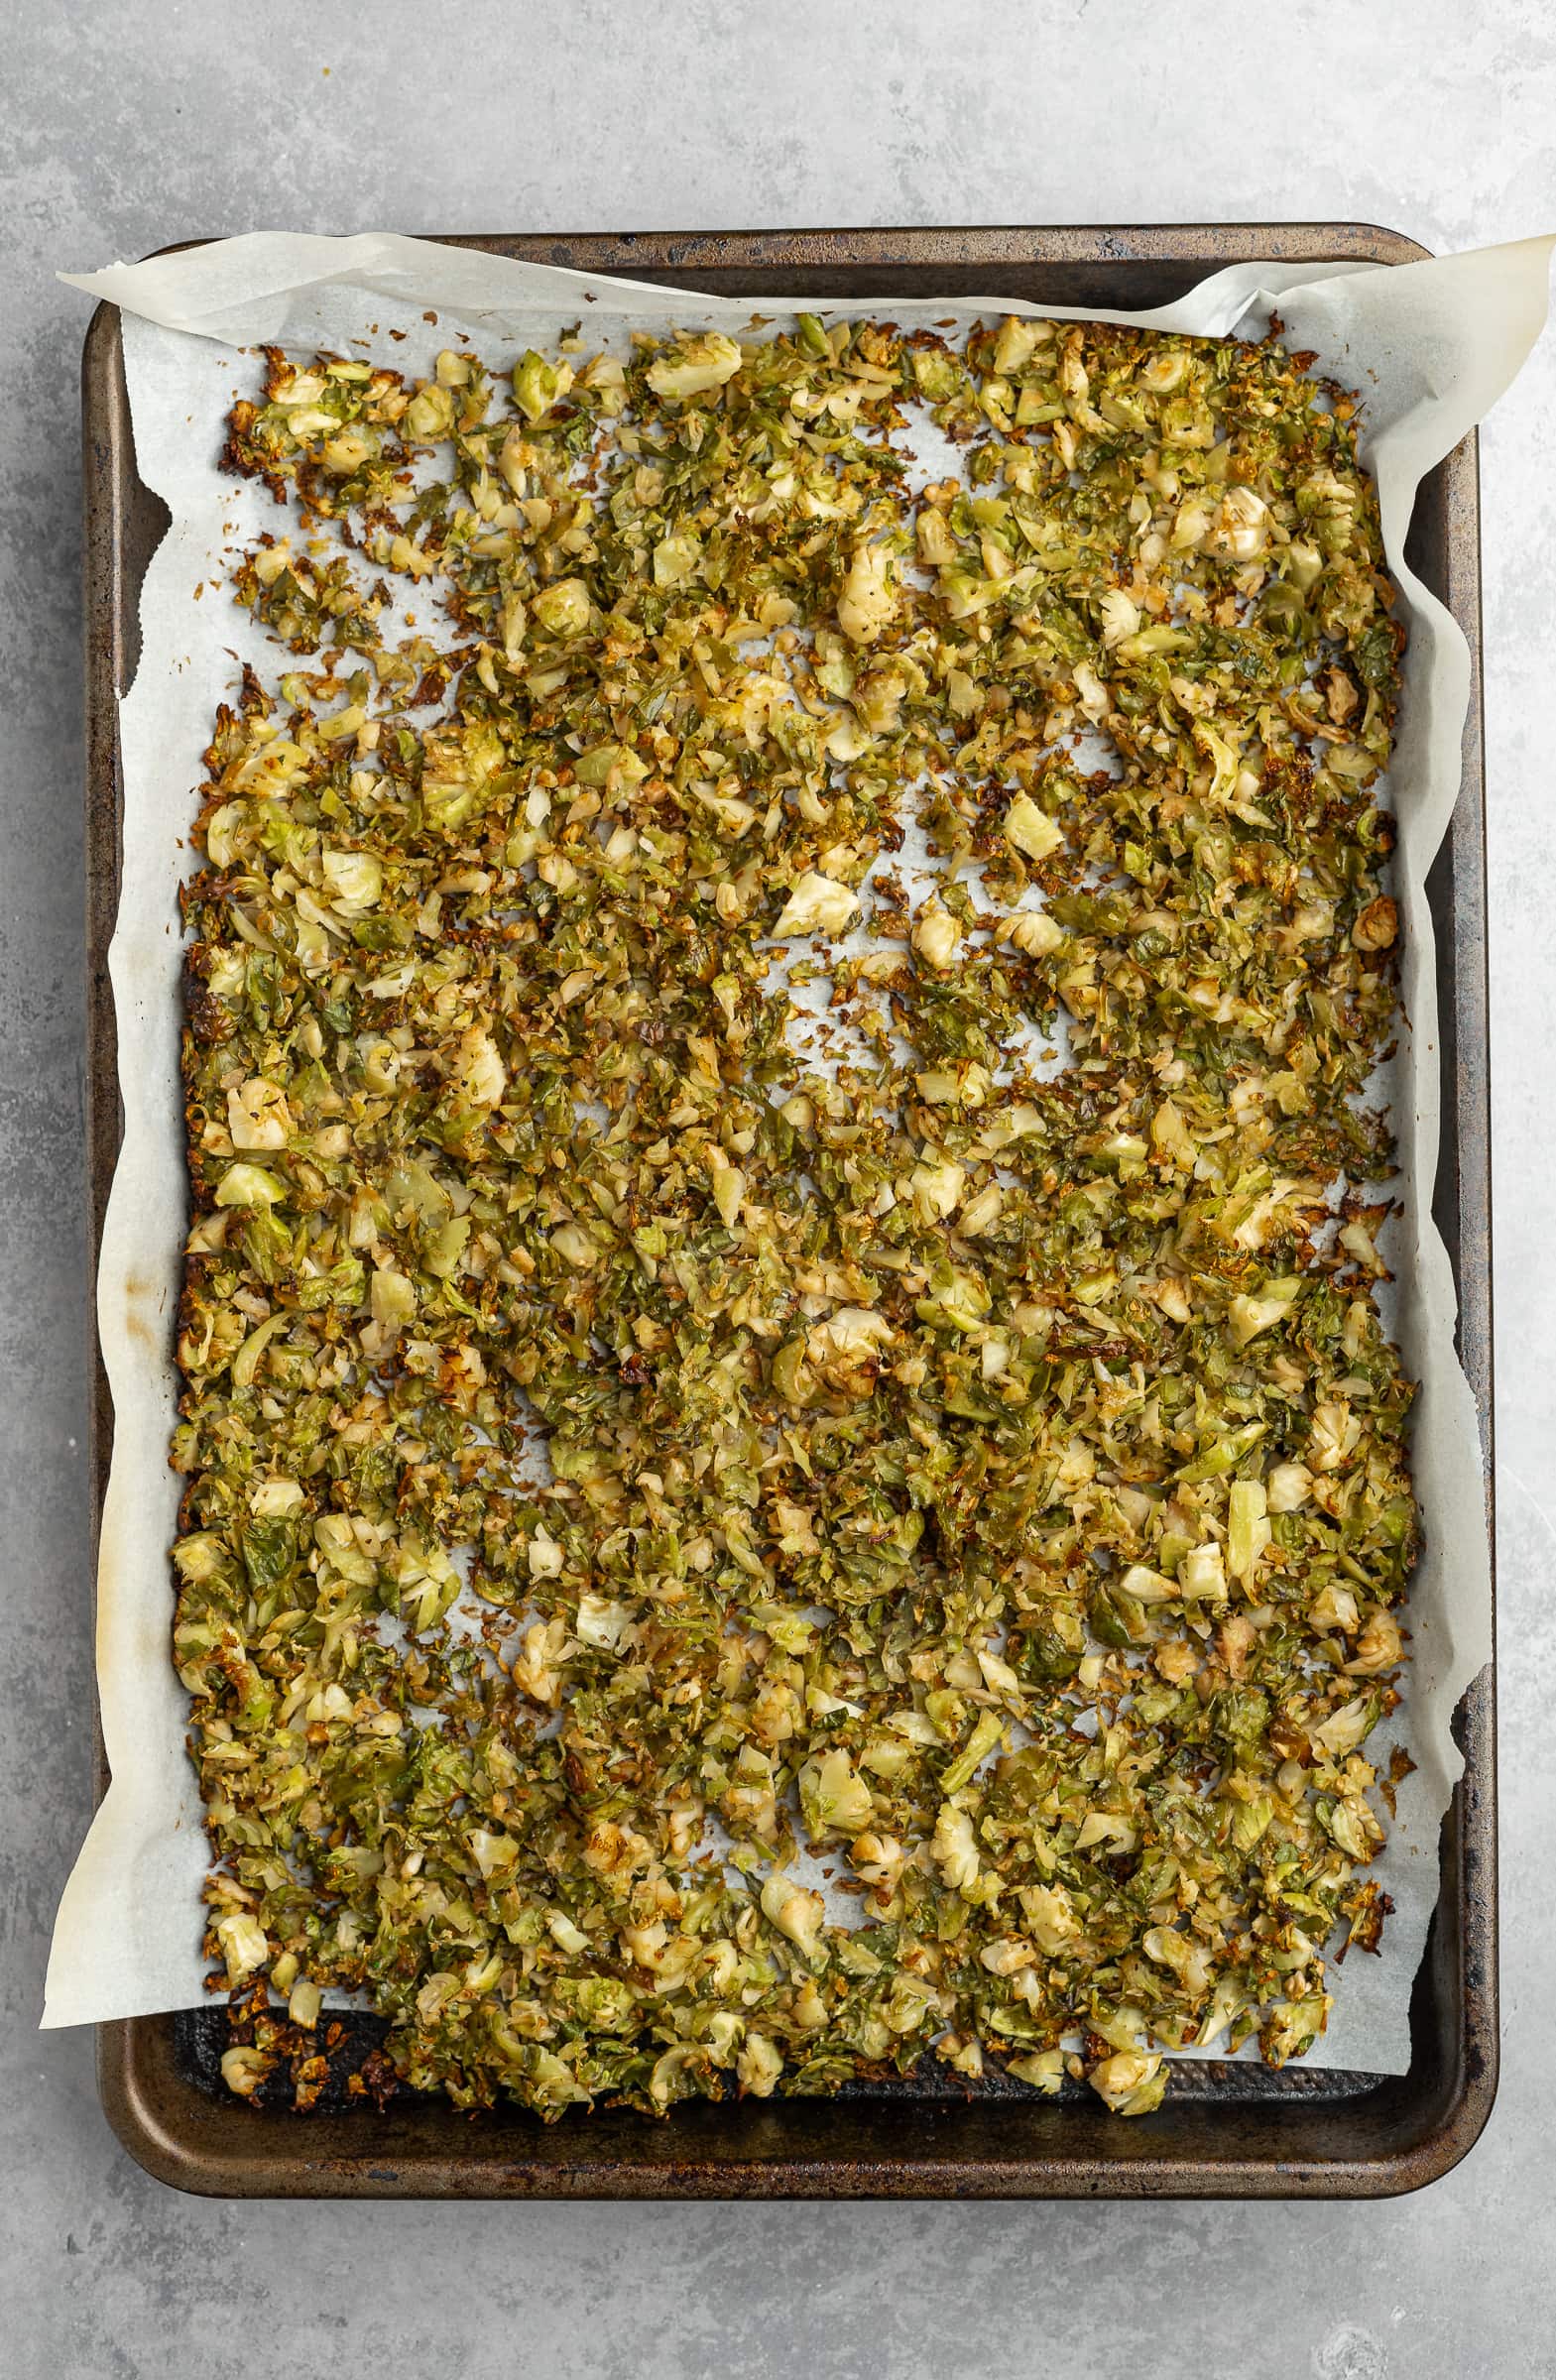 Crispy golden brown shredded Brussels sprouts on a baking tray.